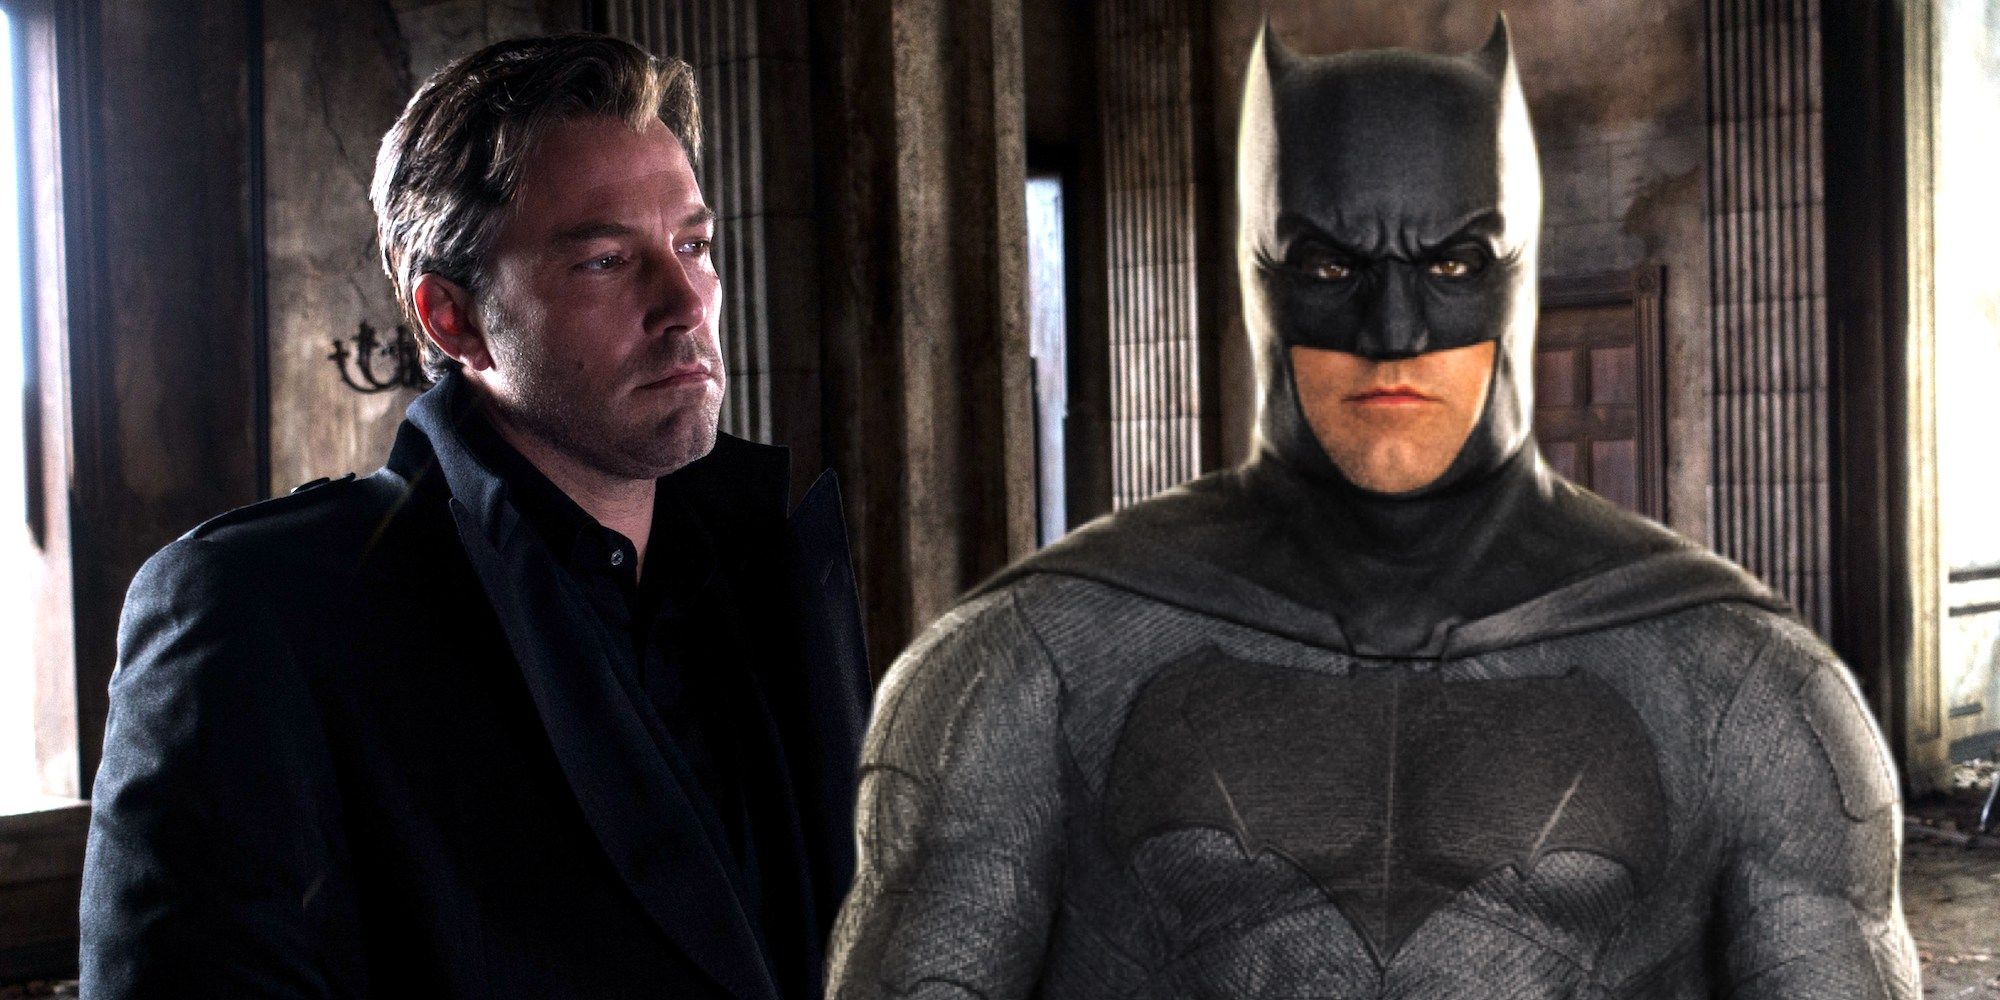 How Justice League Batsuit Differs From BvS